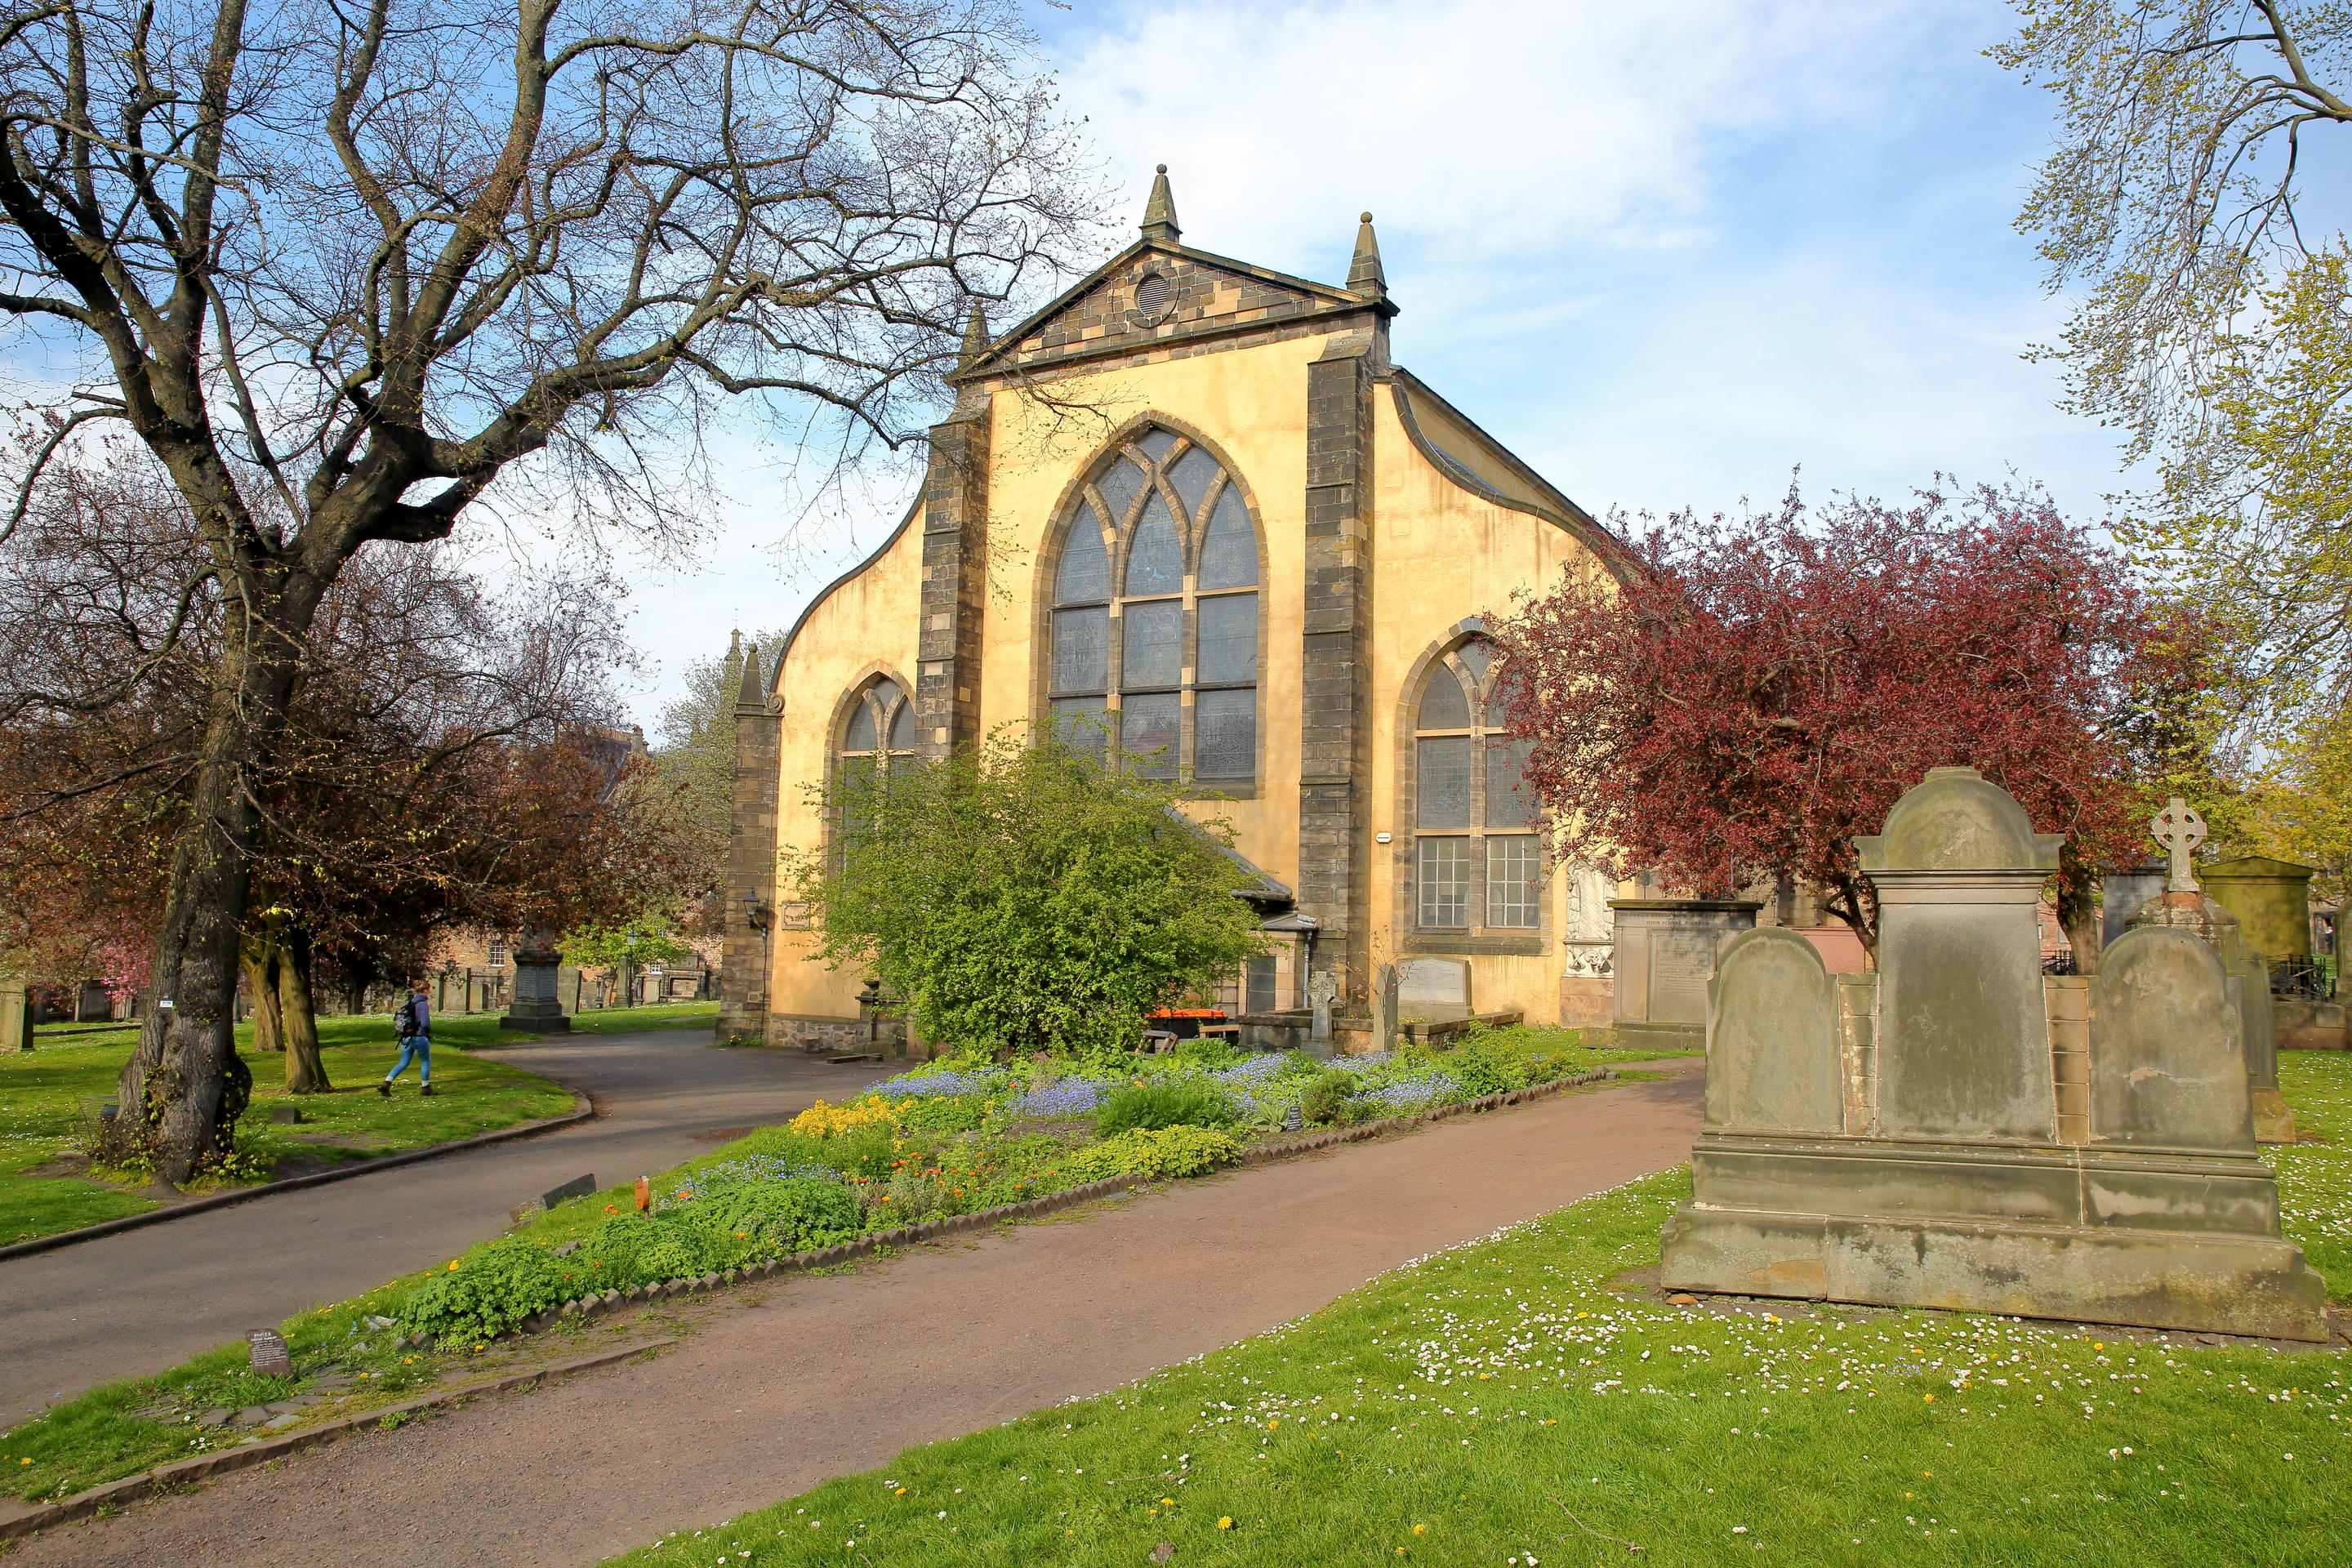 Greyfriars Church Overview